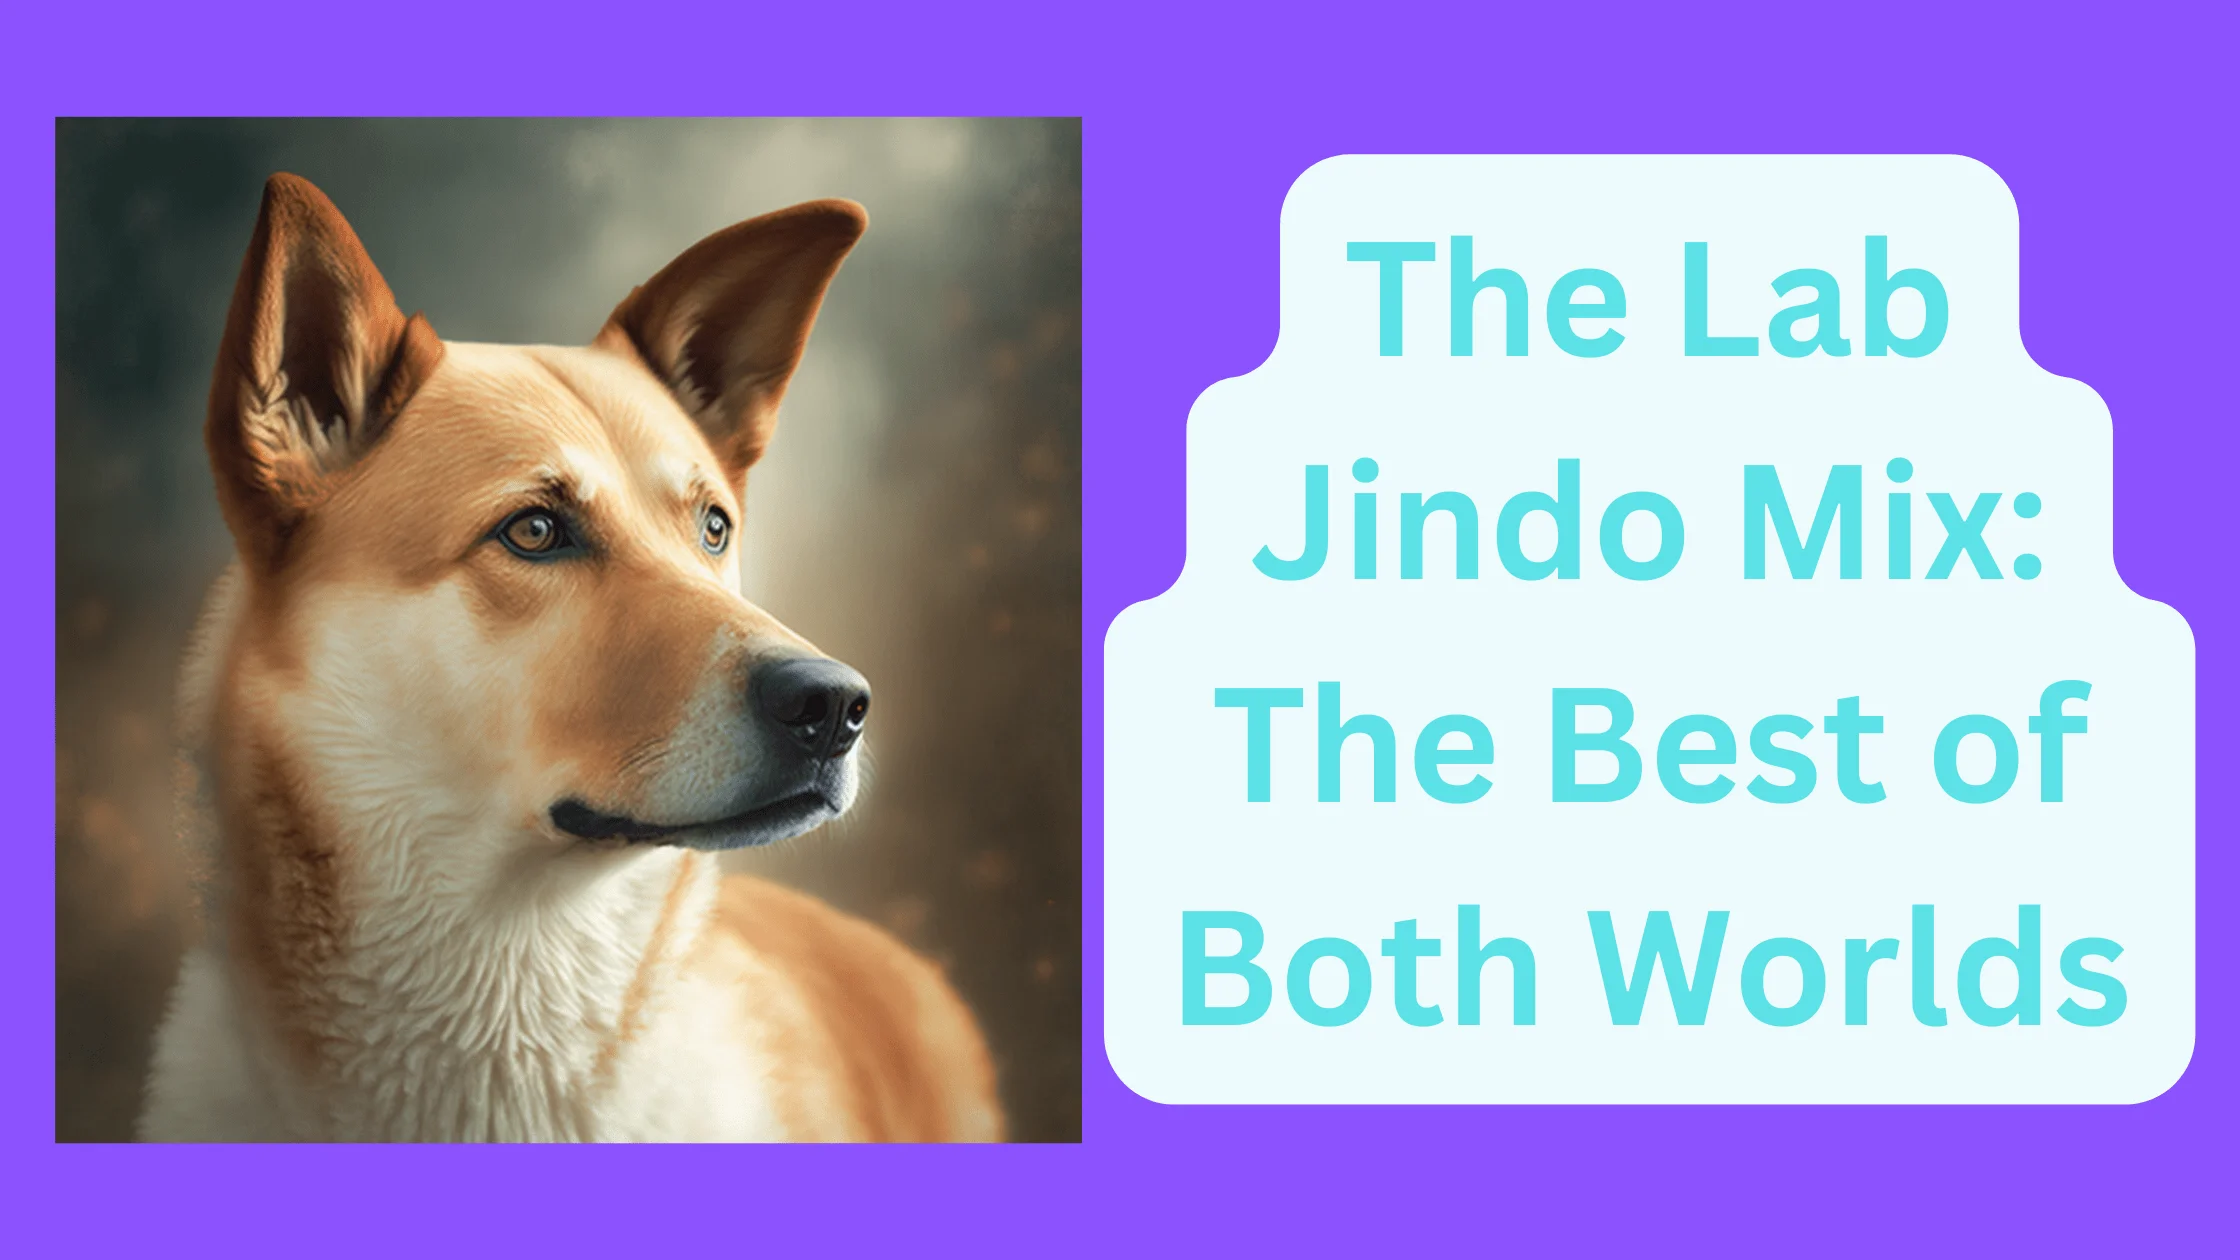 The Lab Jindo Mix: The Best of Both Worlds?